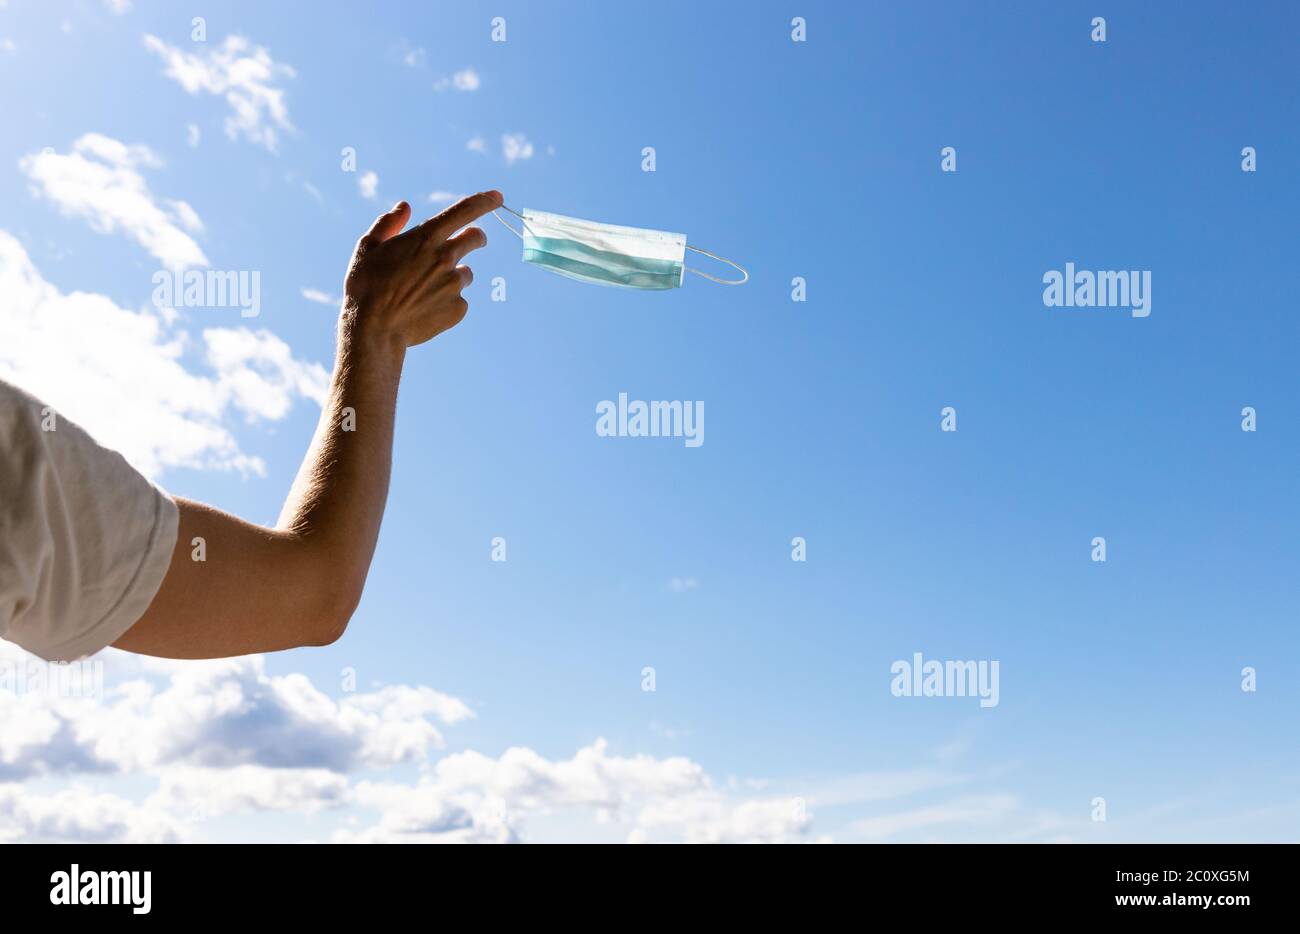 End of quarantine, covid-19. Man taking off and throw away used medical protective mask, holds it on her finger on blue sky background, enjoys life, b Stock Photo